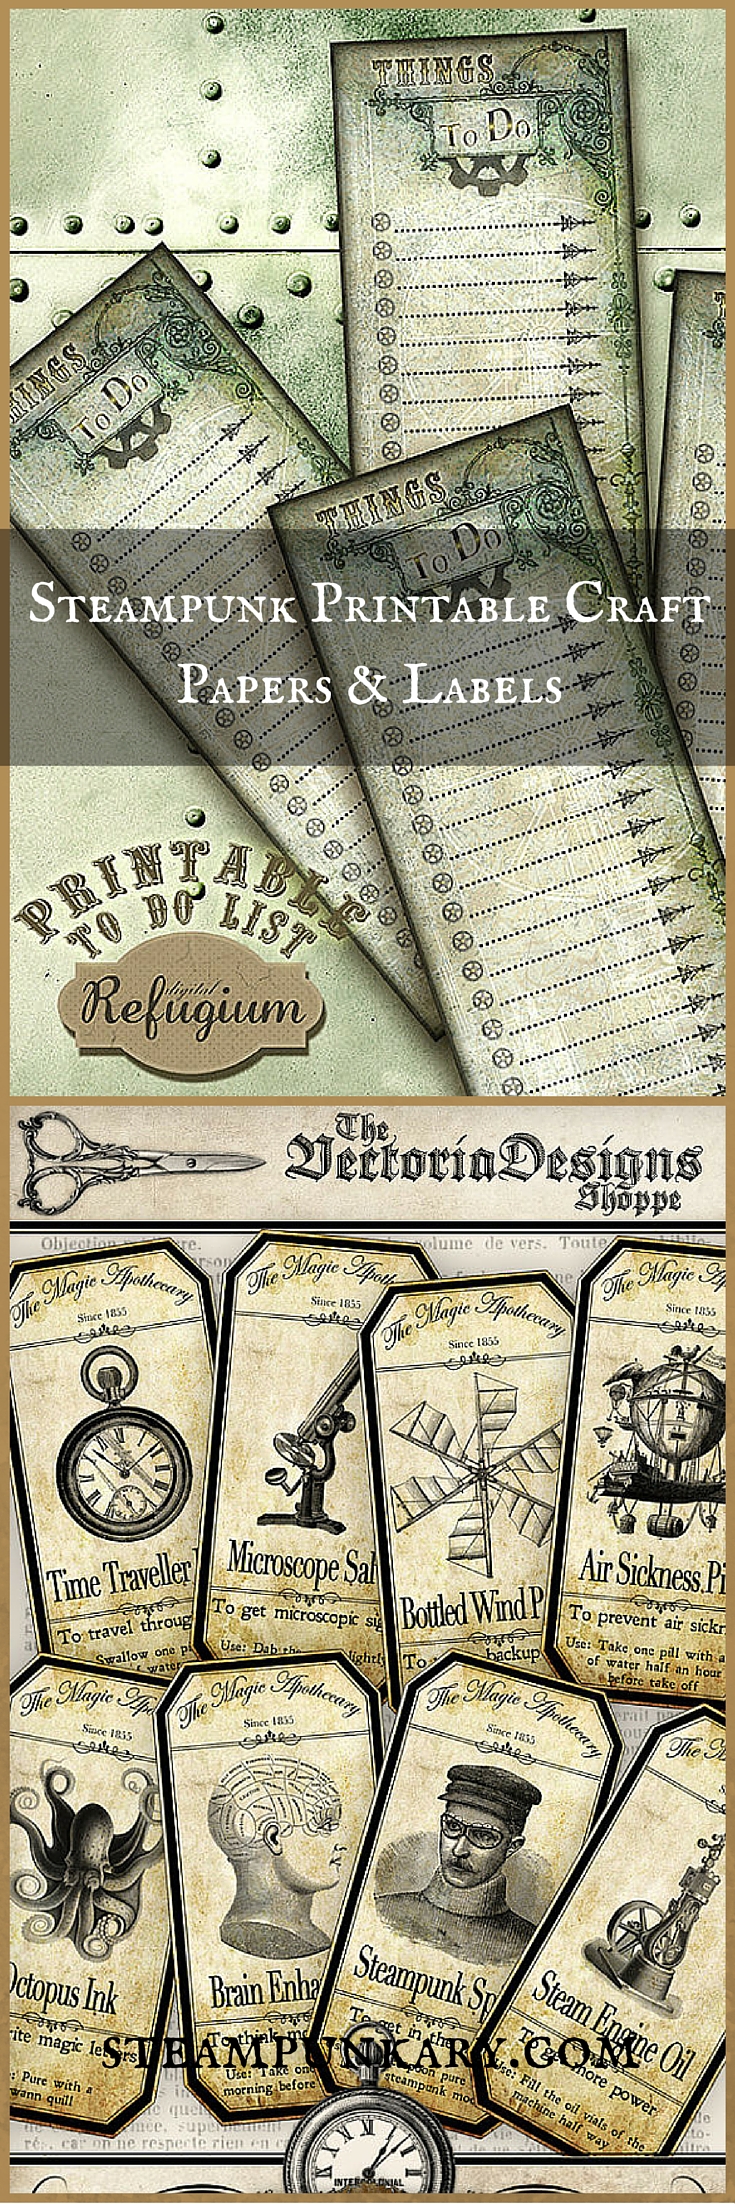 Steampunk Printable Craft Papers and Labels